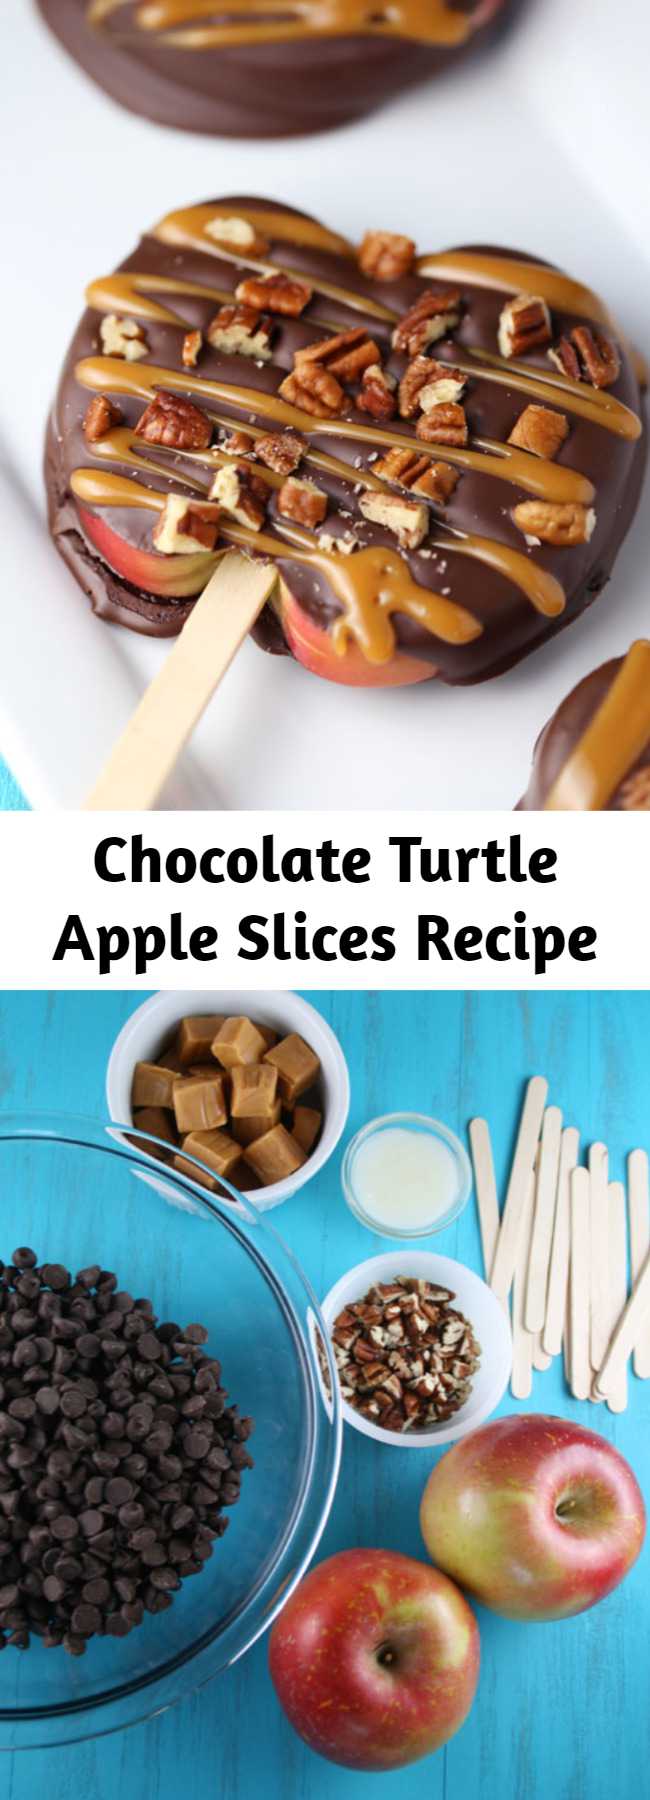 Chocolate Turtle Apple Slices Recipe - Chocolate Turtle Apple Slices are thick slices of Fuji apples covered in melted chocolate, drizzled with caramel and topped with nuts.